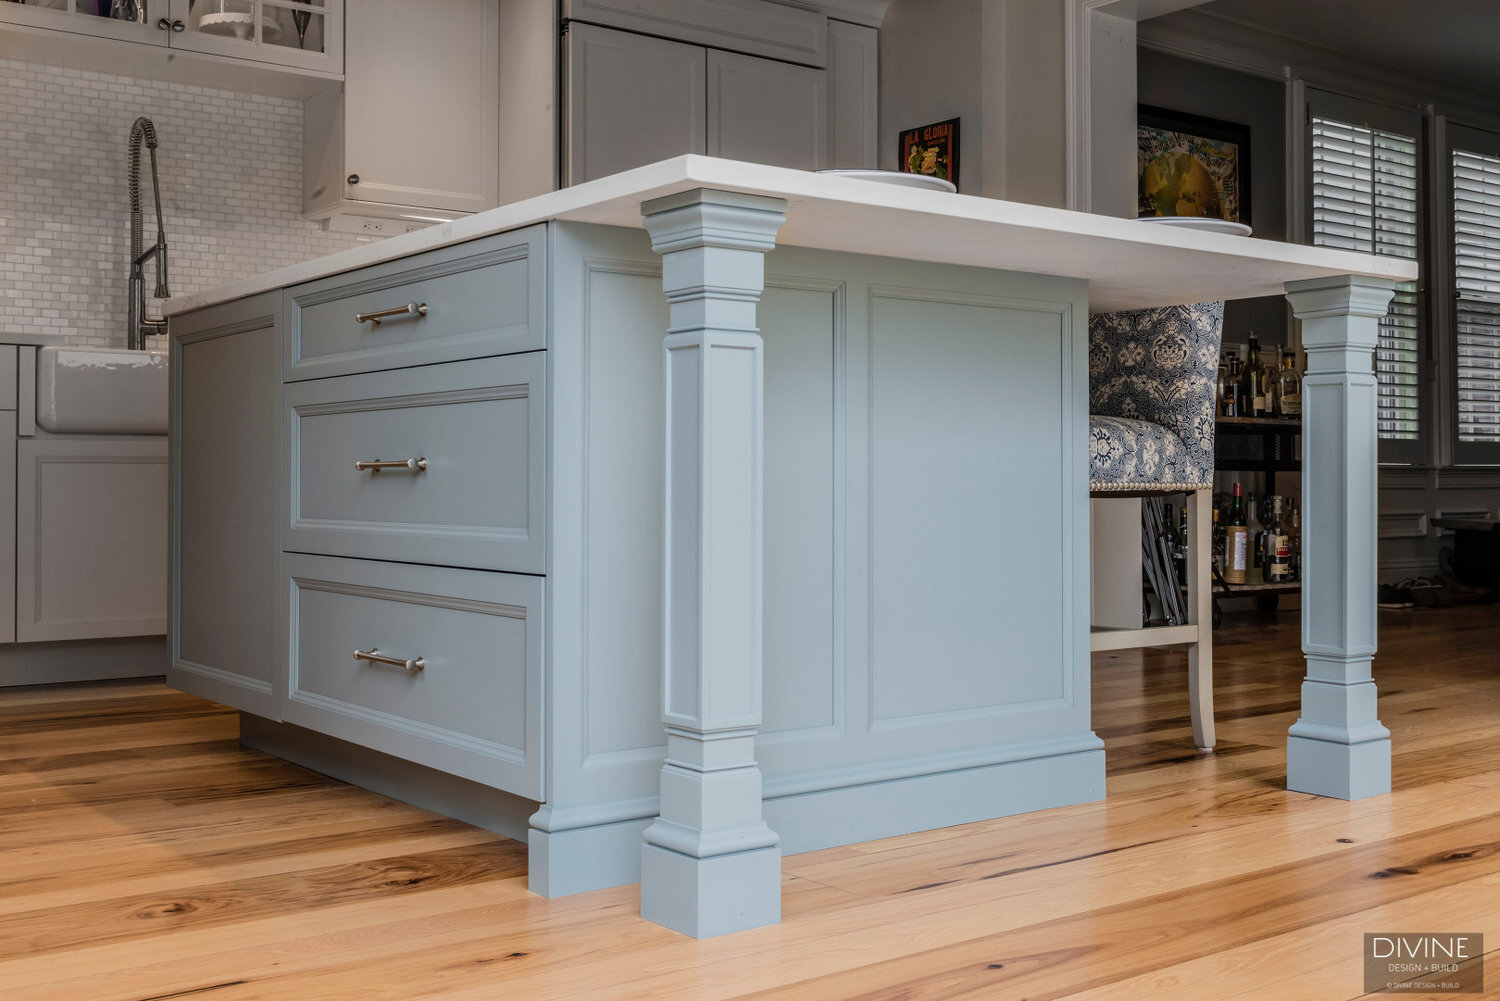  Blue traditional style kitchen island with cambria countertops and a bosch microwave integrated below the countertop